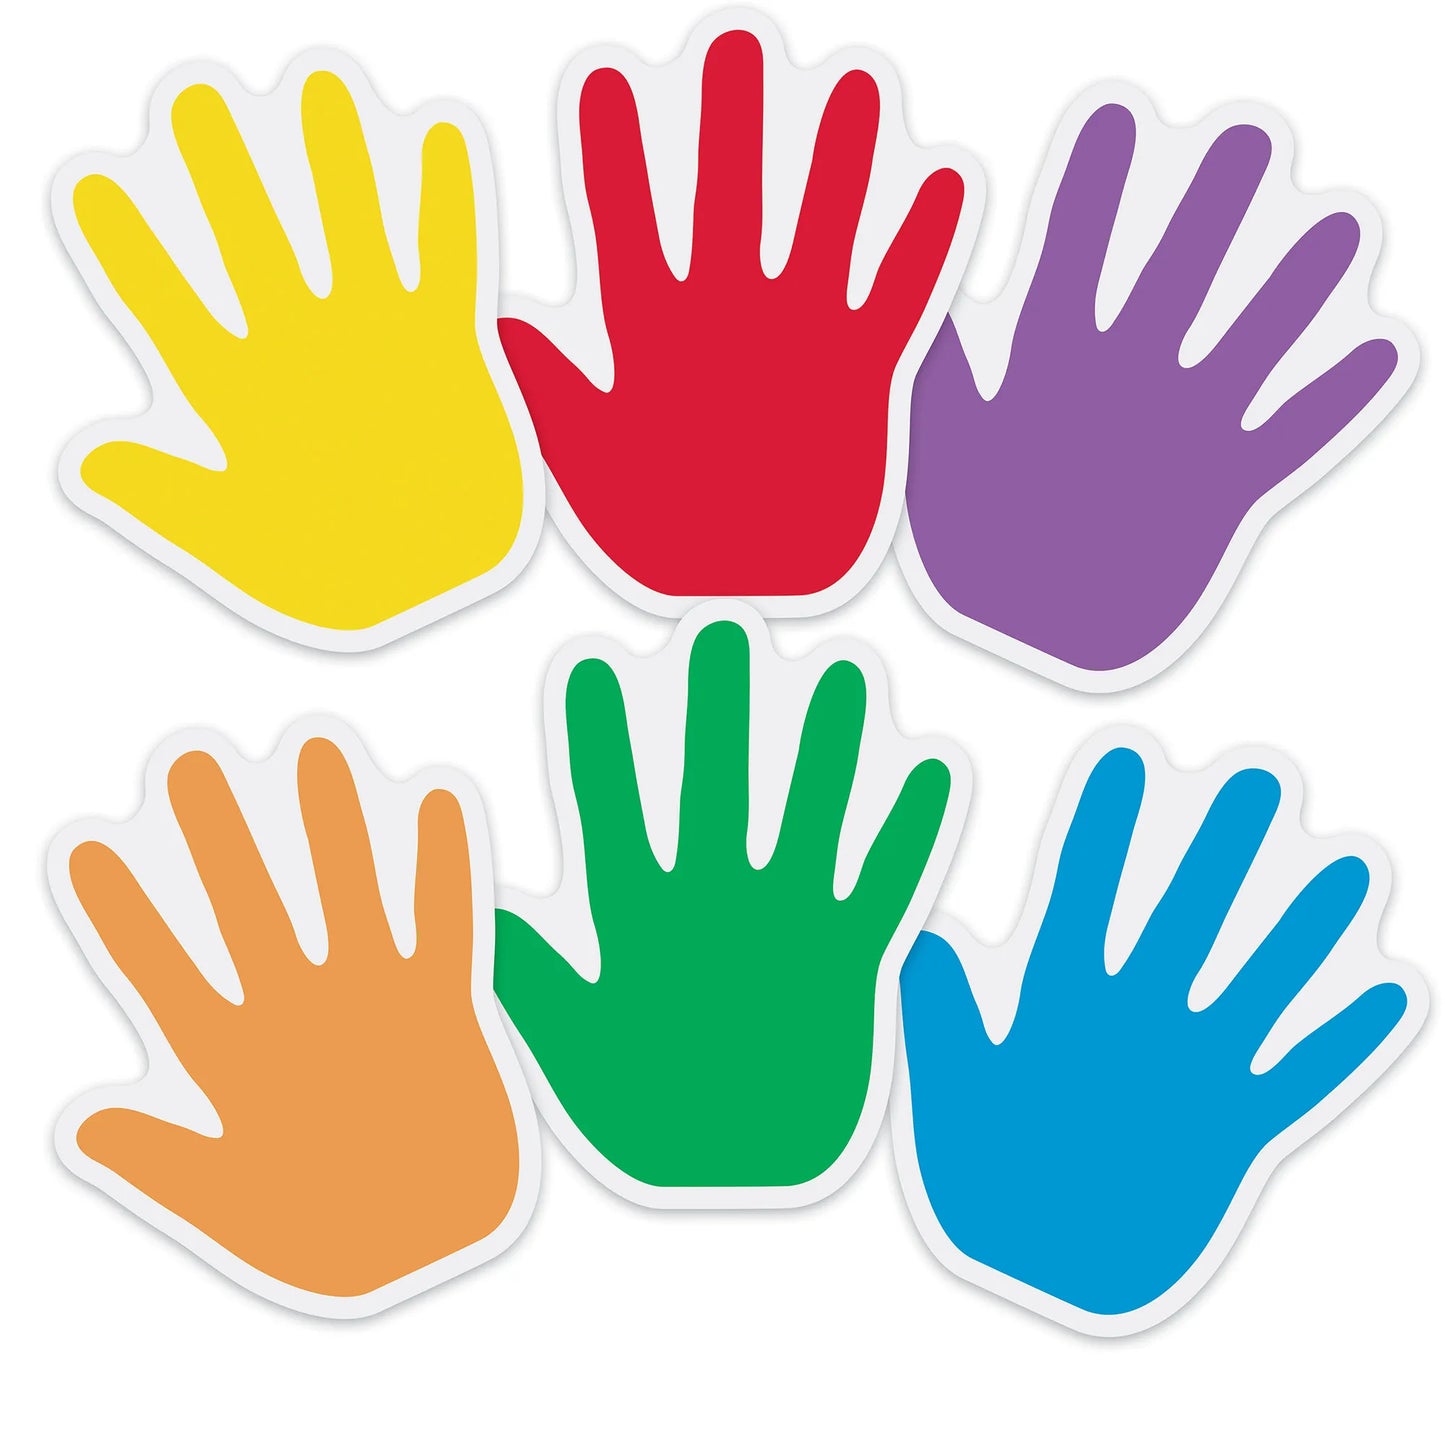 Learning Resources Helping Hands Pocket Chart